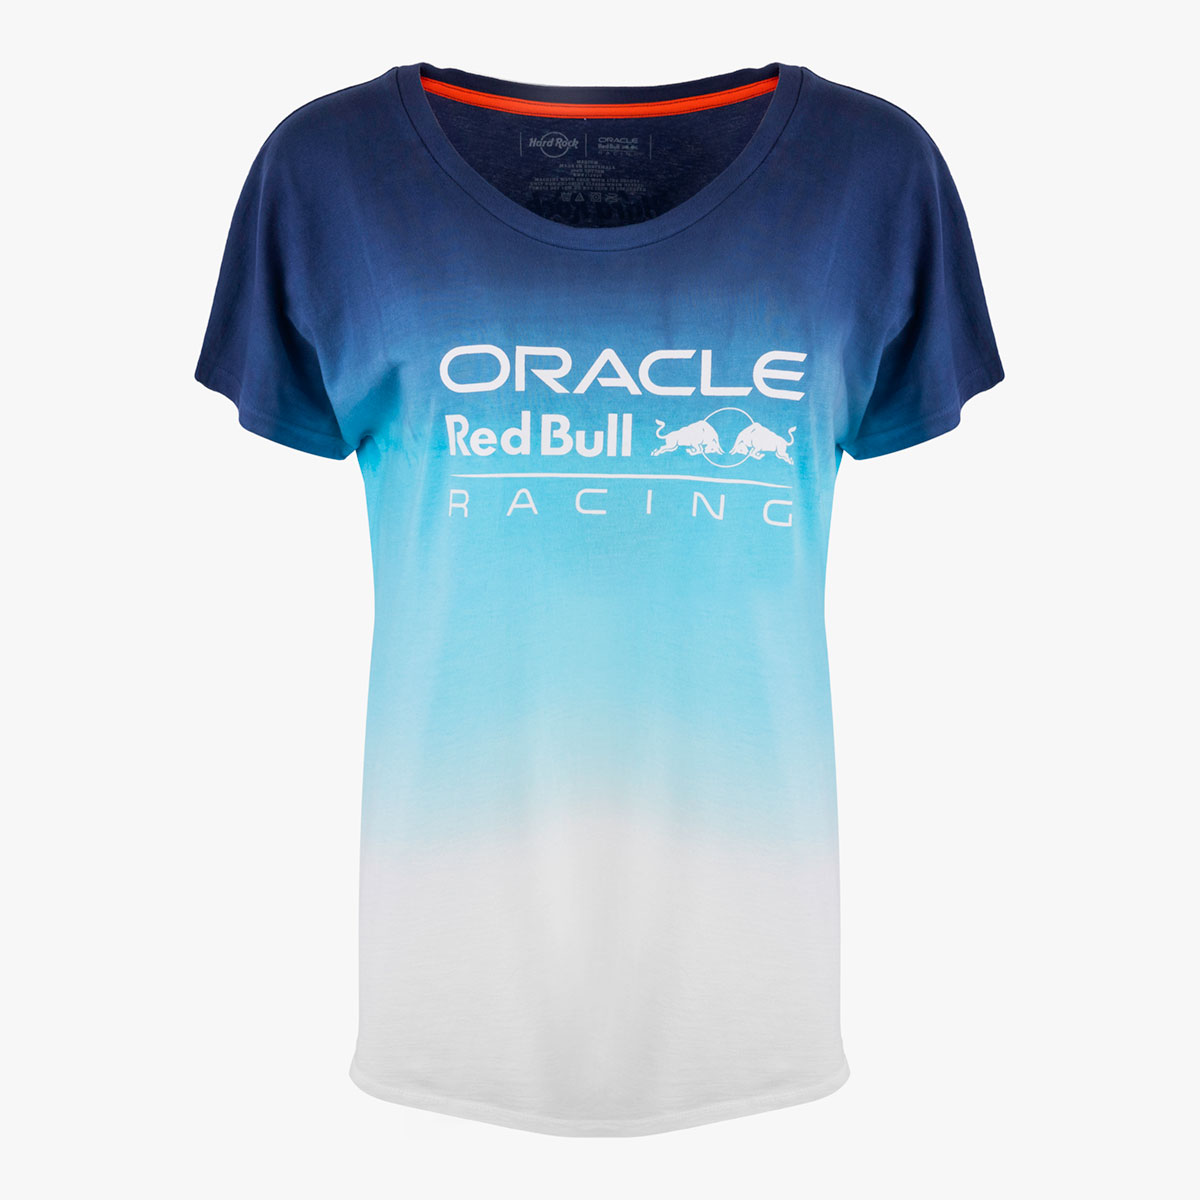 Oracle Red Bull Slim Fit Tee with Blue Ombre Gradient image number 1